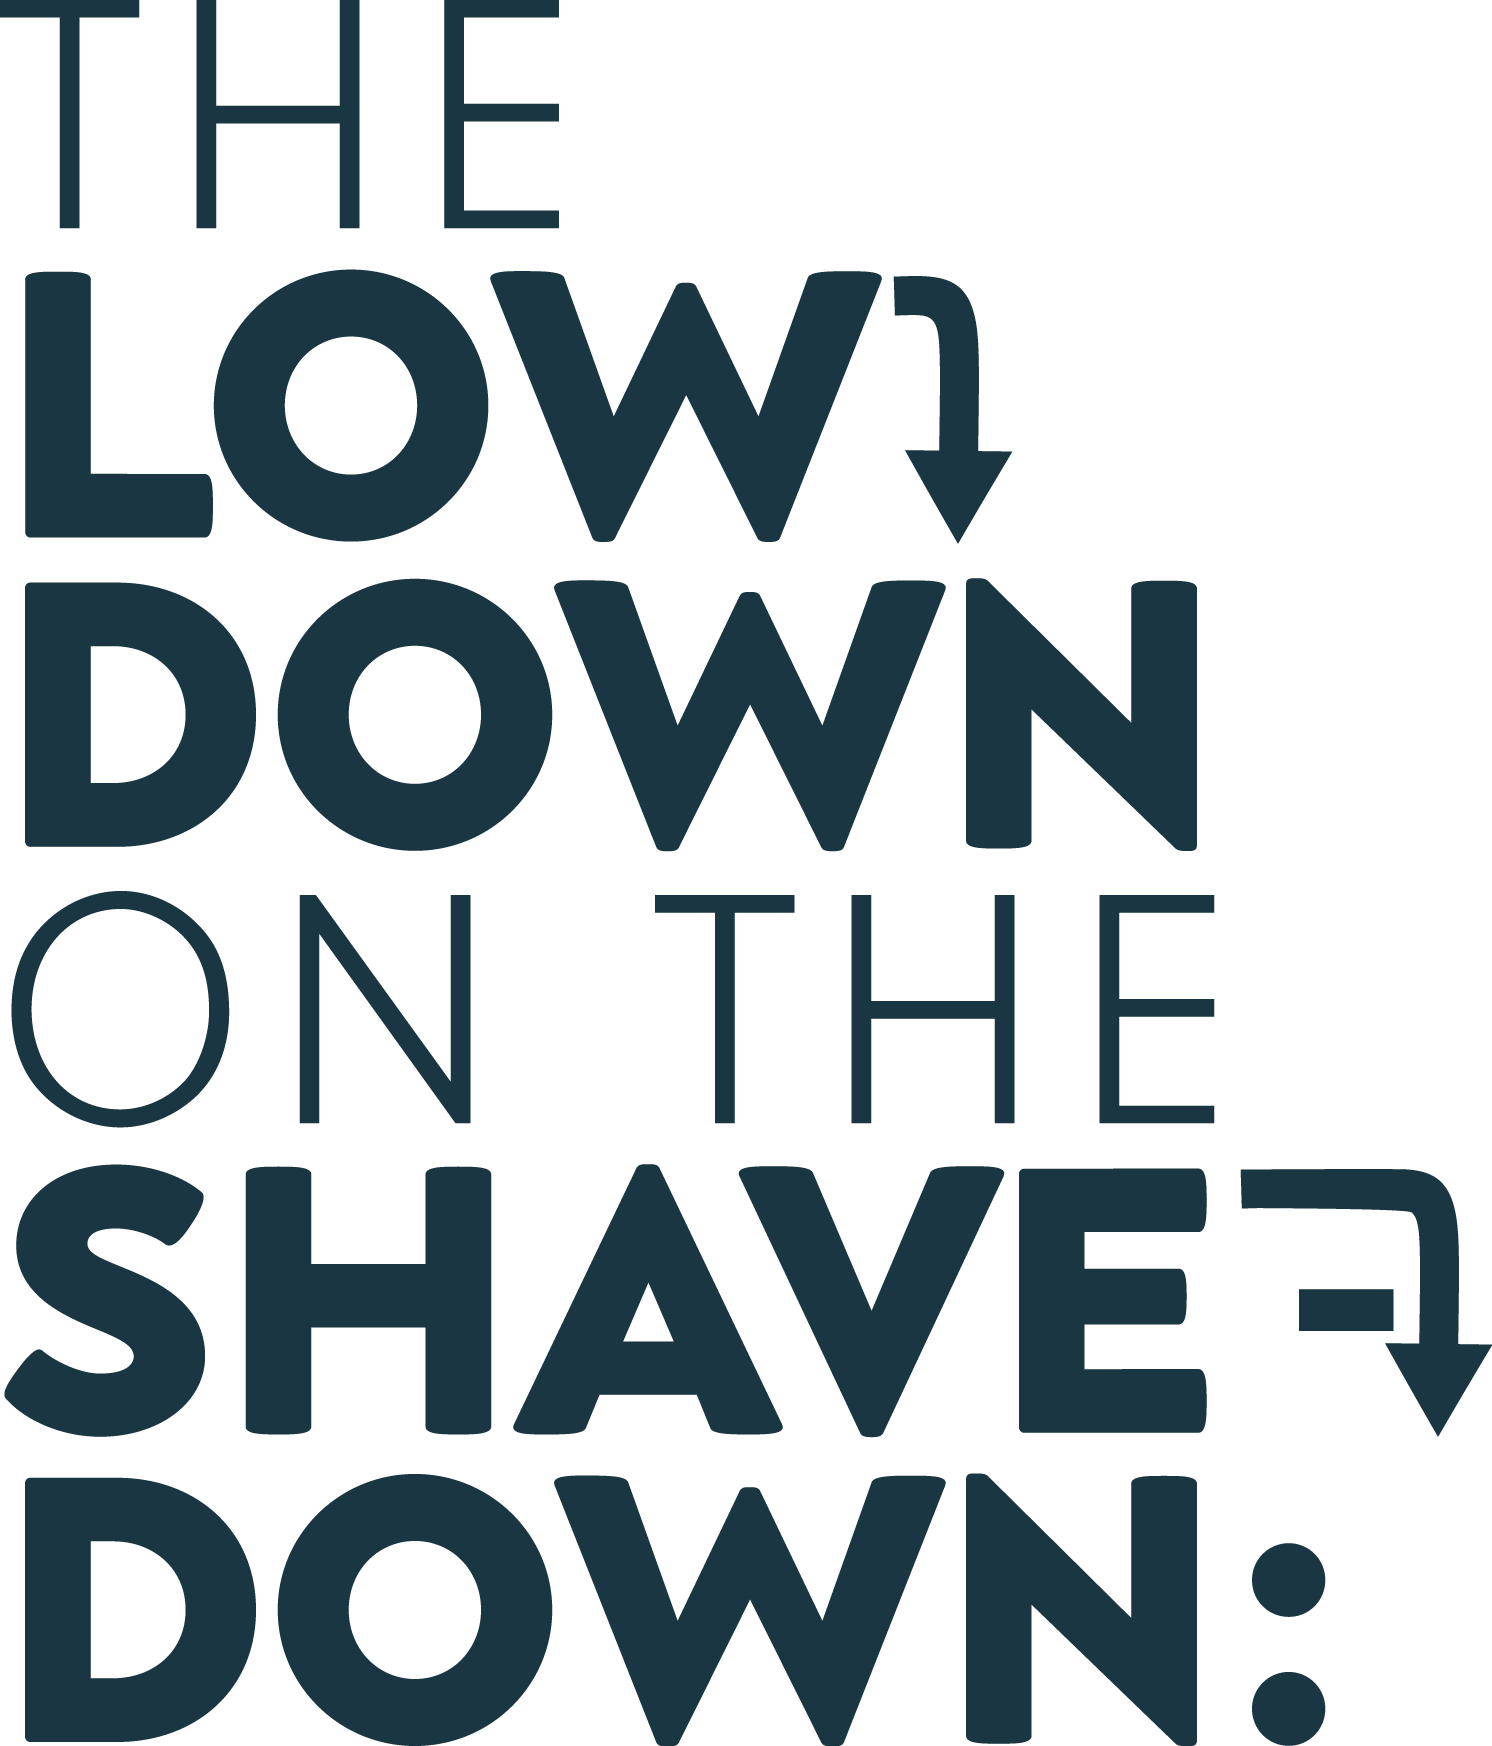 "The Low Down on the Shave Down" and barber pole